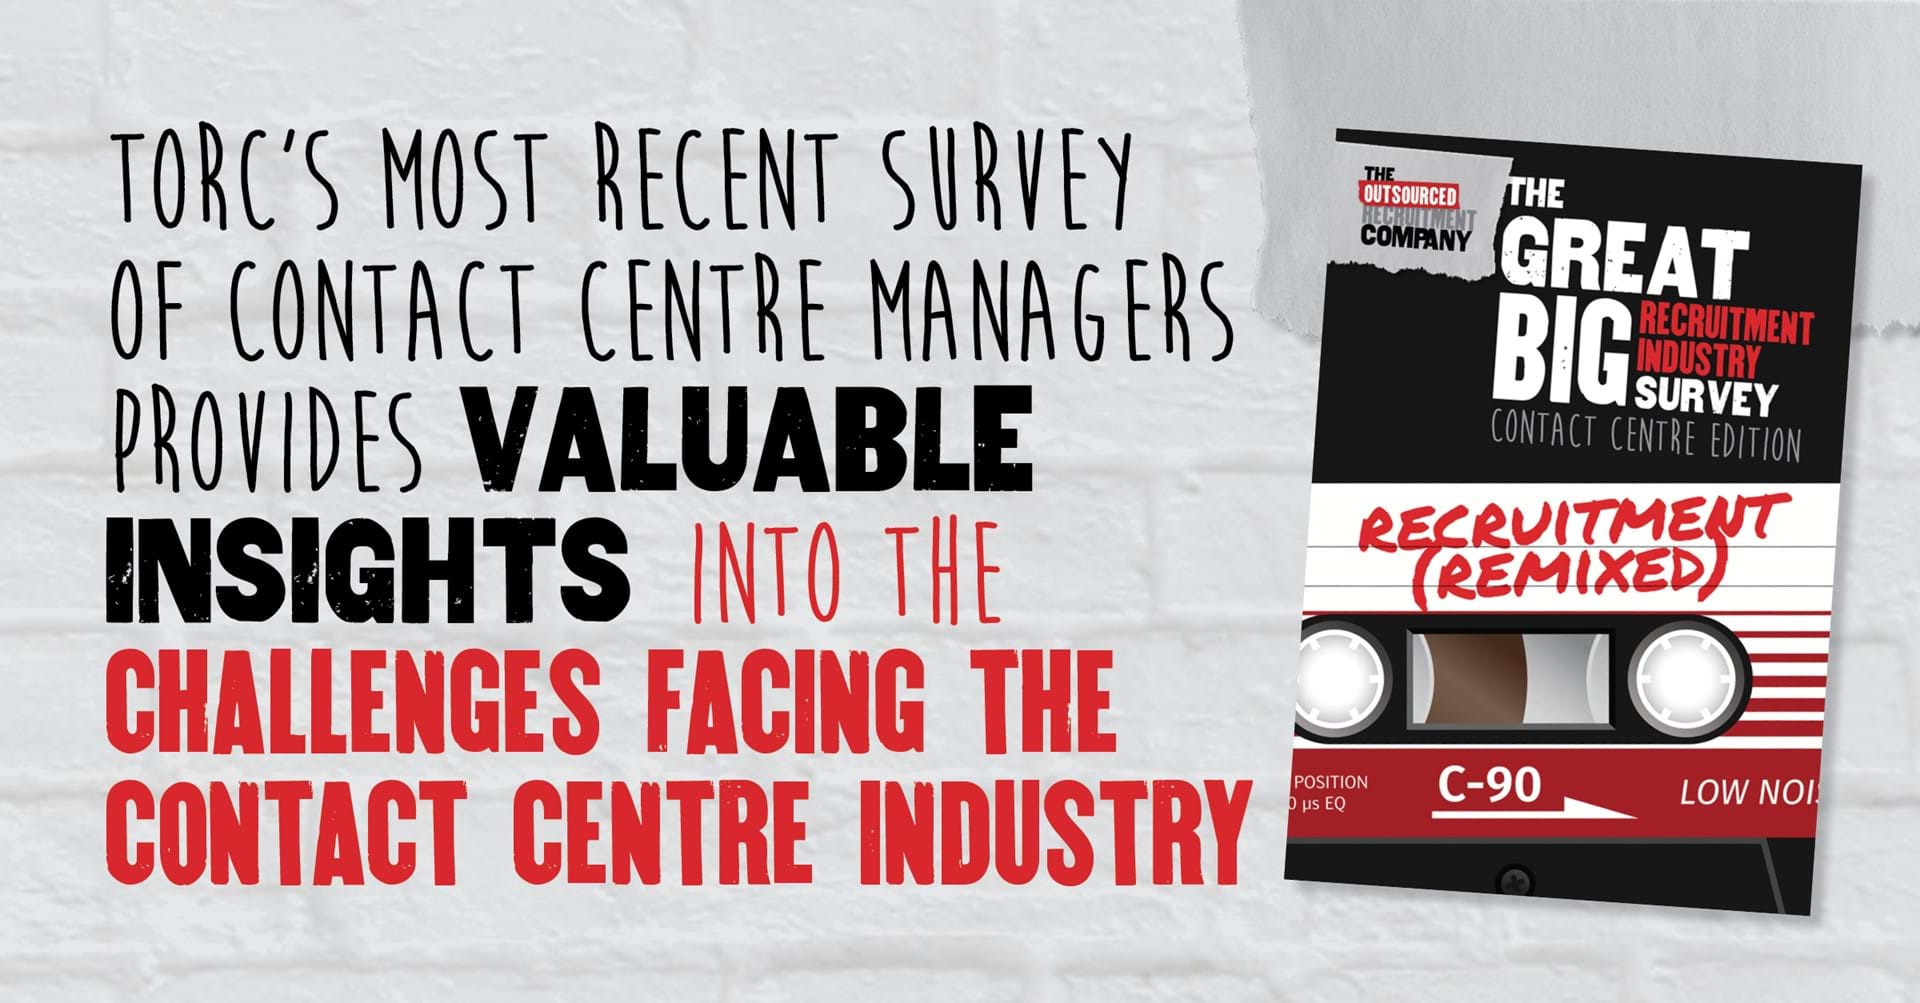 Torcs most recent survey of contact centre managers provides valuable insights into the challenges facing the contact centre industry